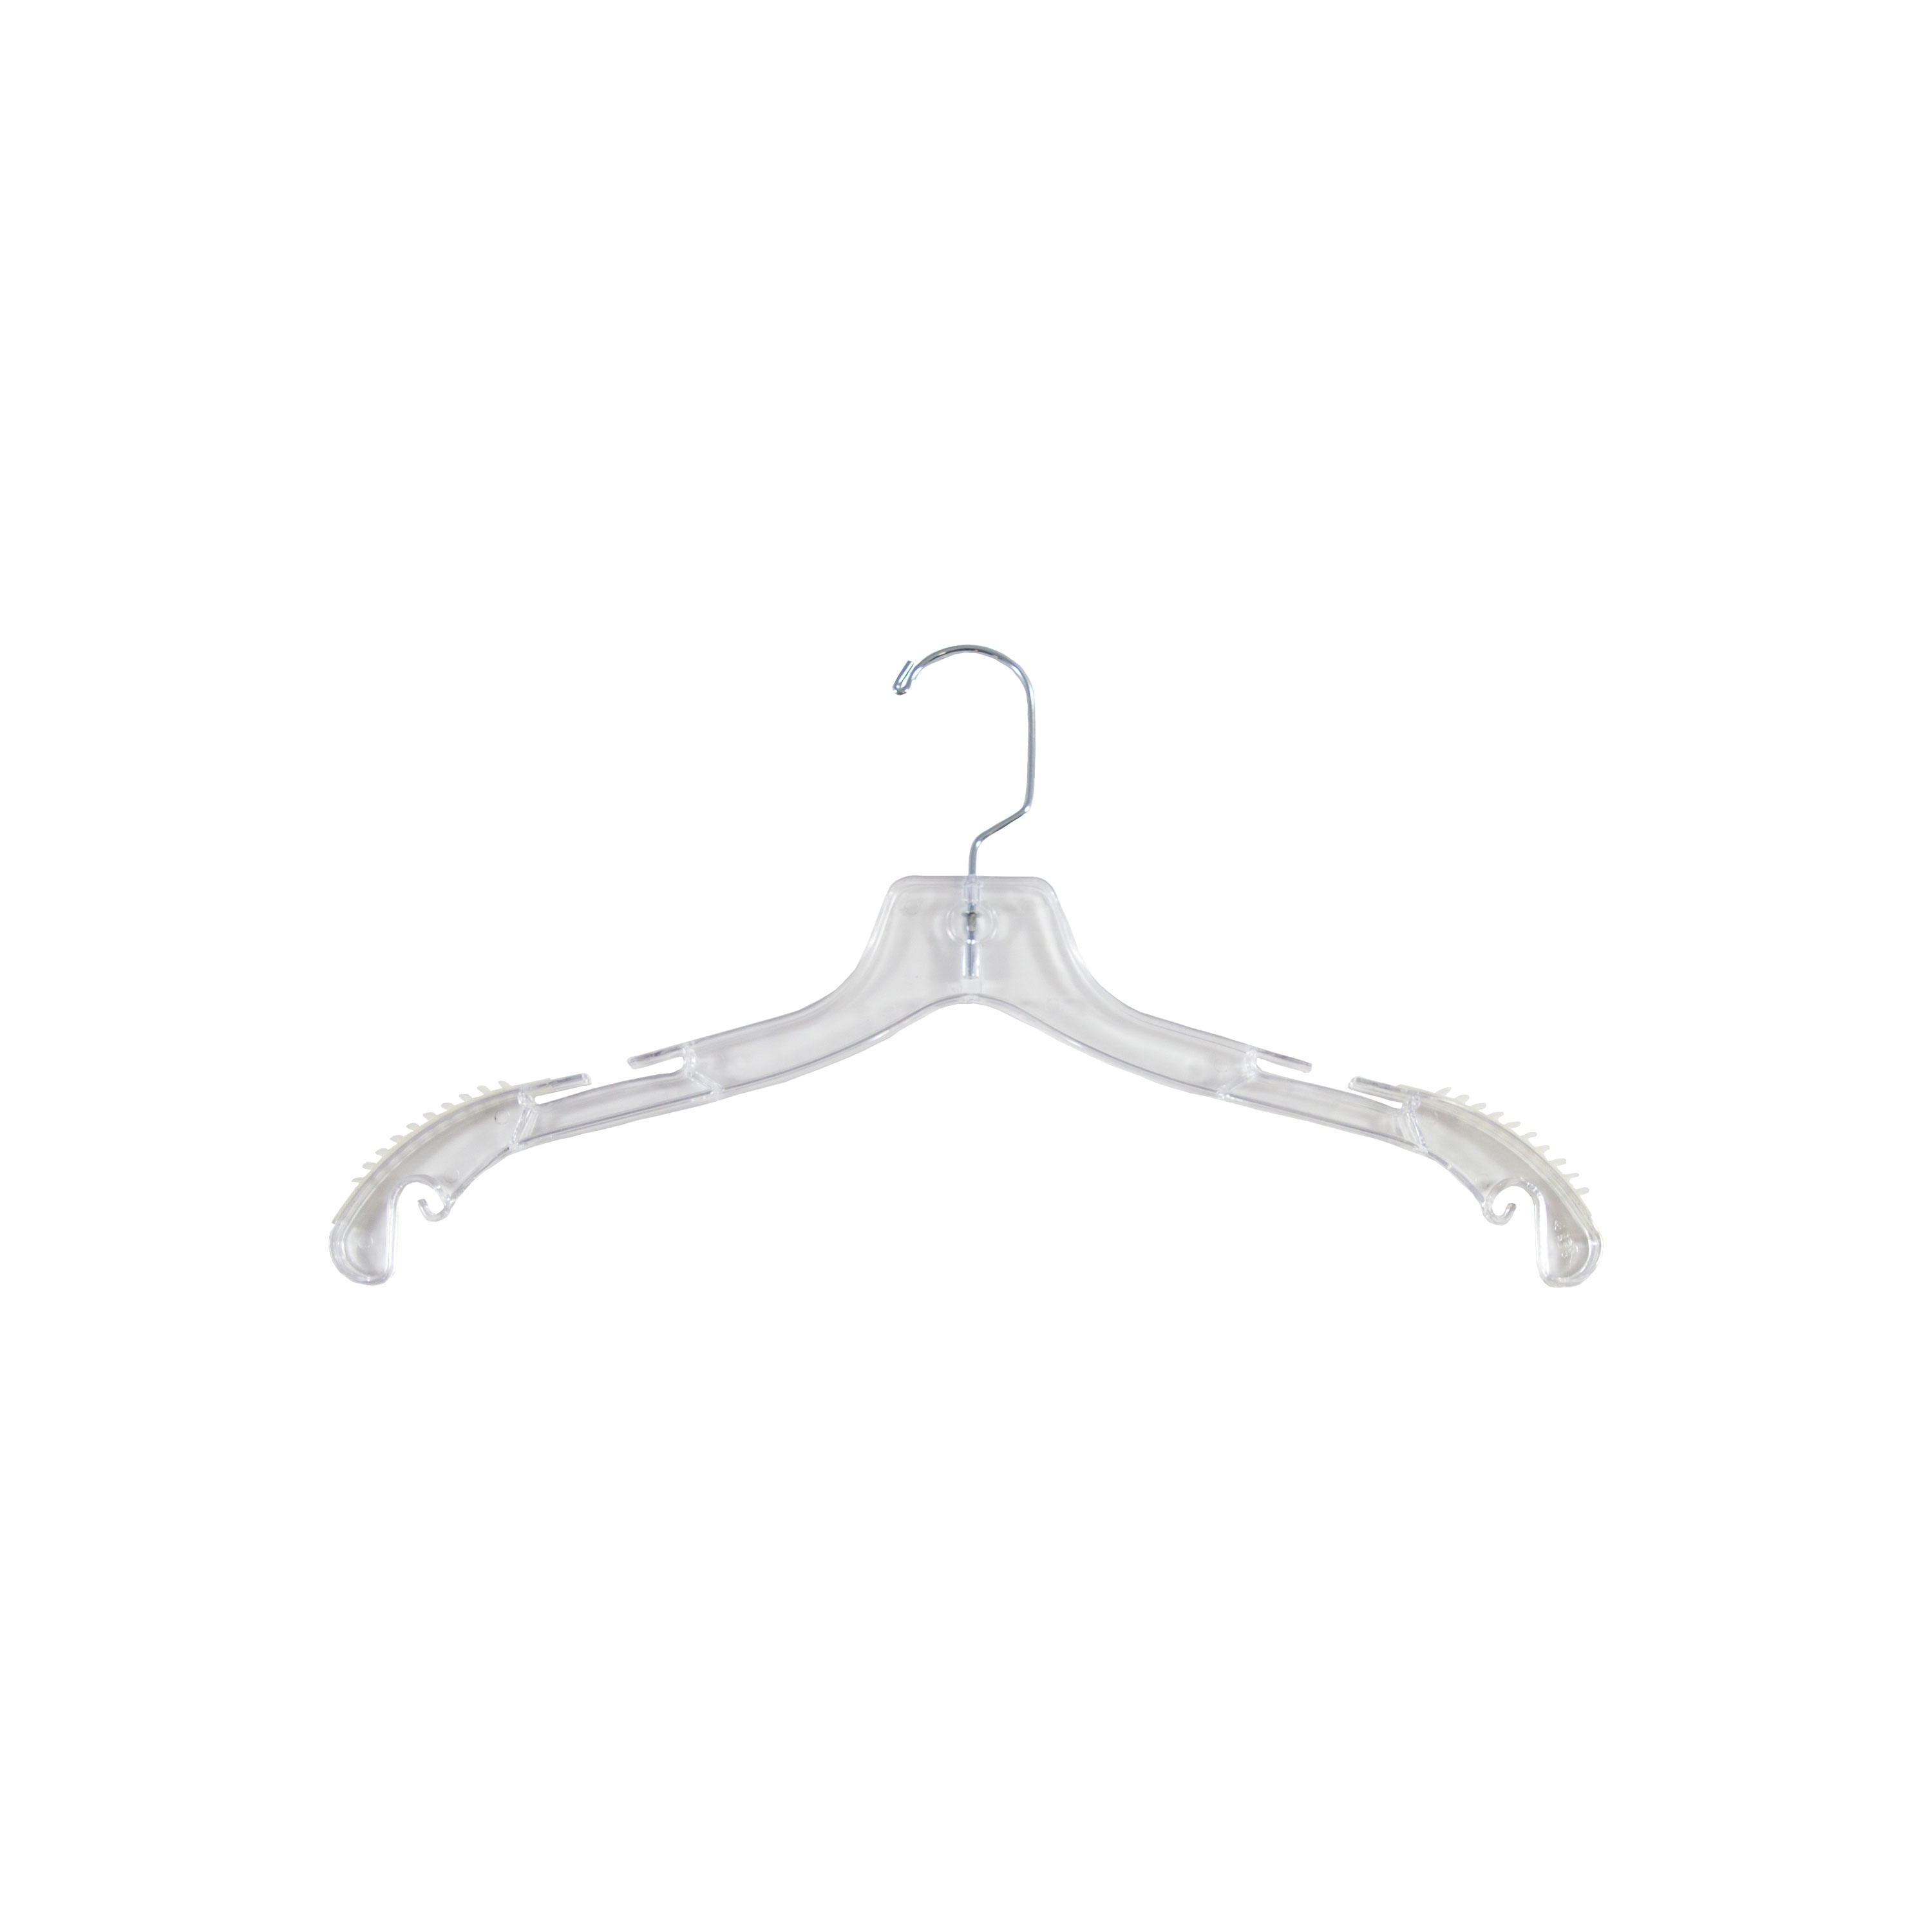 10 Pack Clothes Hangers Non-Slip Notched Space-Saving Plastic Clothing Hangers for Shirt Suit Coat Home Store Use